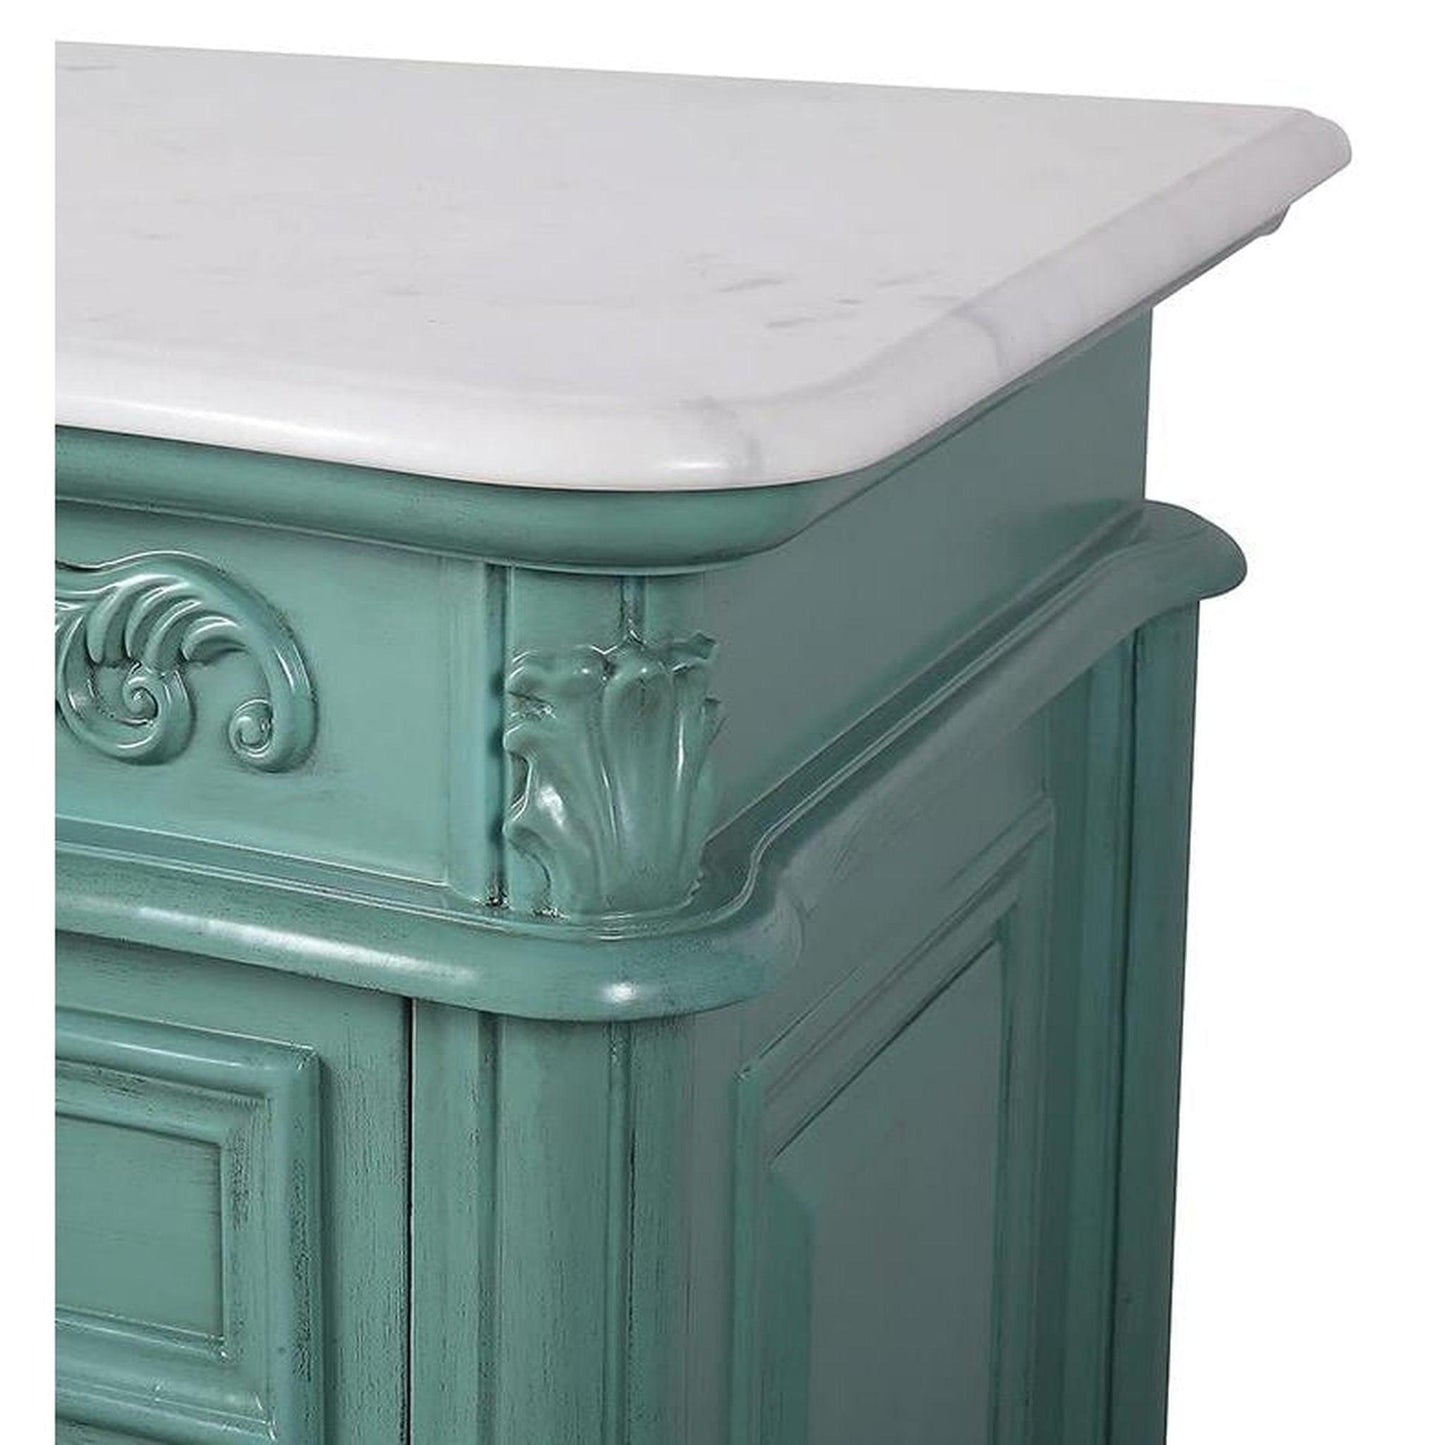 Silkroad Exclusive 60" Single Sink Vintage Green Bathroom Vanity With Carrara White Marble Countertop and White Ceramic Undermount Sink